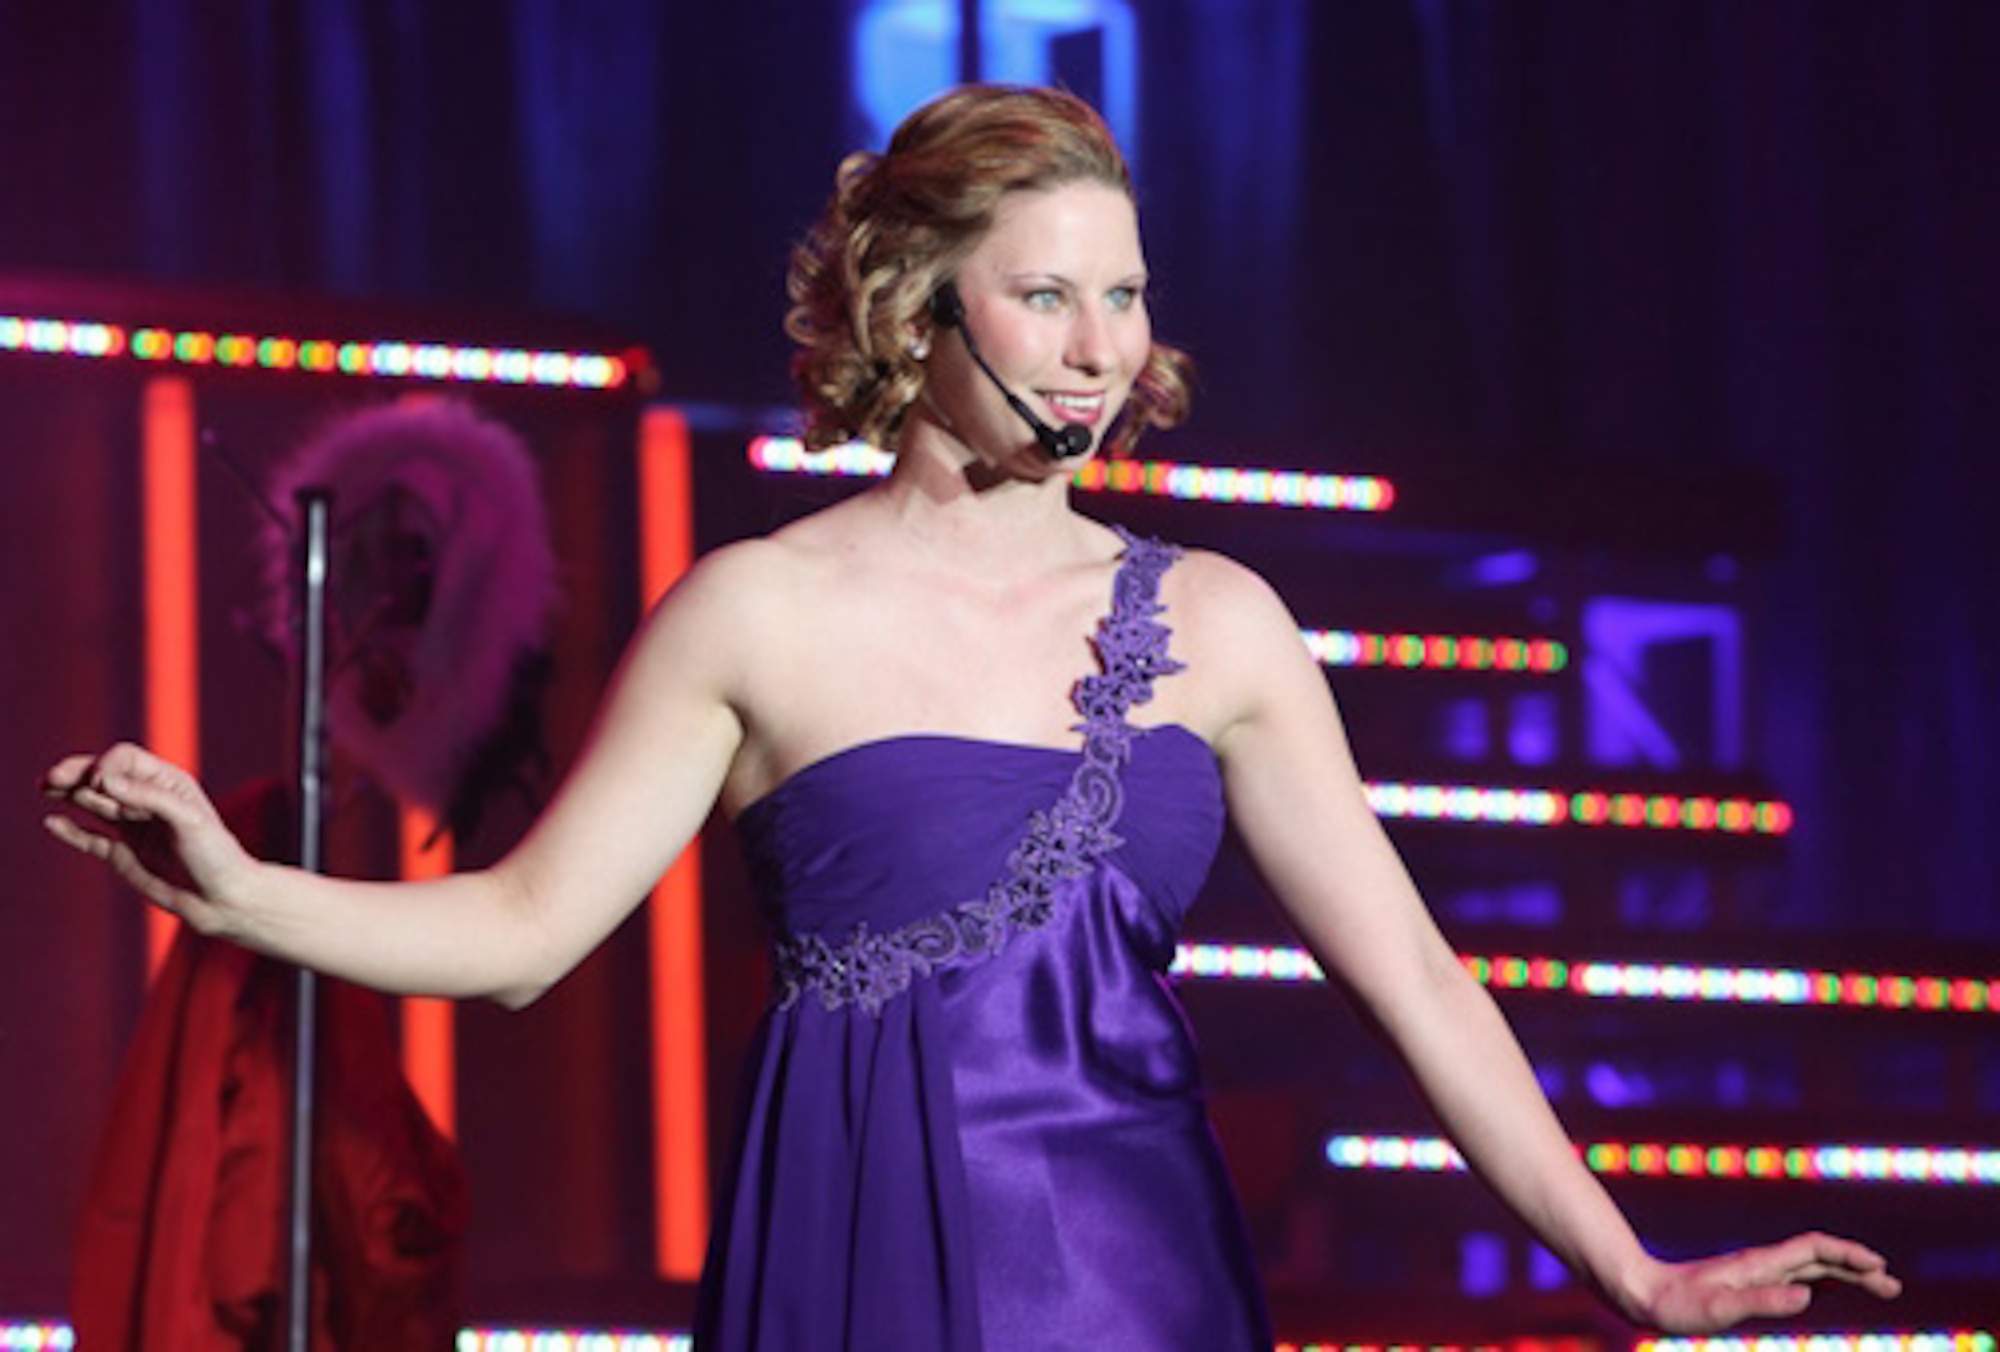 LACKLAND AFB, Texas - Tech. Sgt. Katie Badowski showcases her vocal talents performing at the Bob Hope Performing Arts Center.  Contestants auditioned for the 2010 Air Force Worldwide Talent Search Jan. 17-25. (U.S. Air Force photo/Maj. Chris Burch)